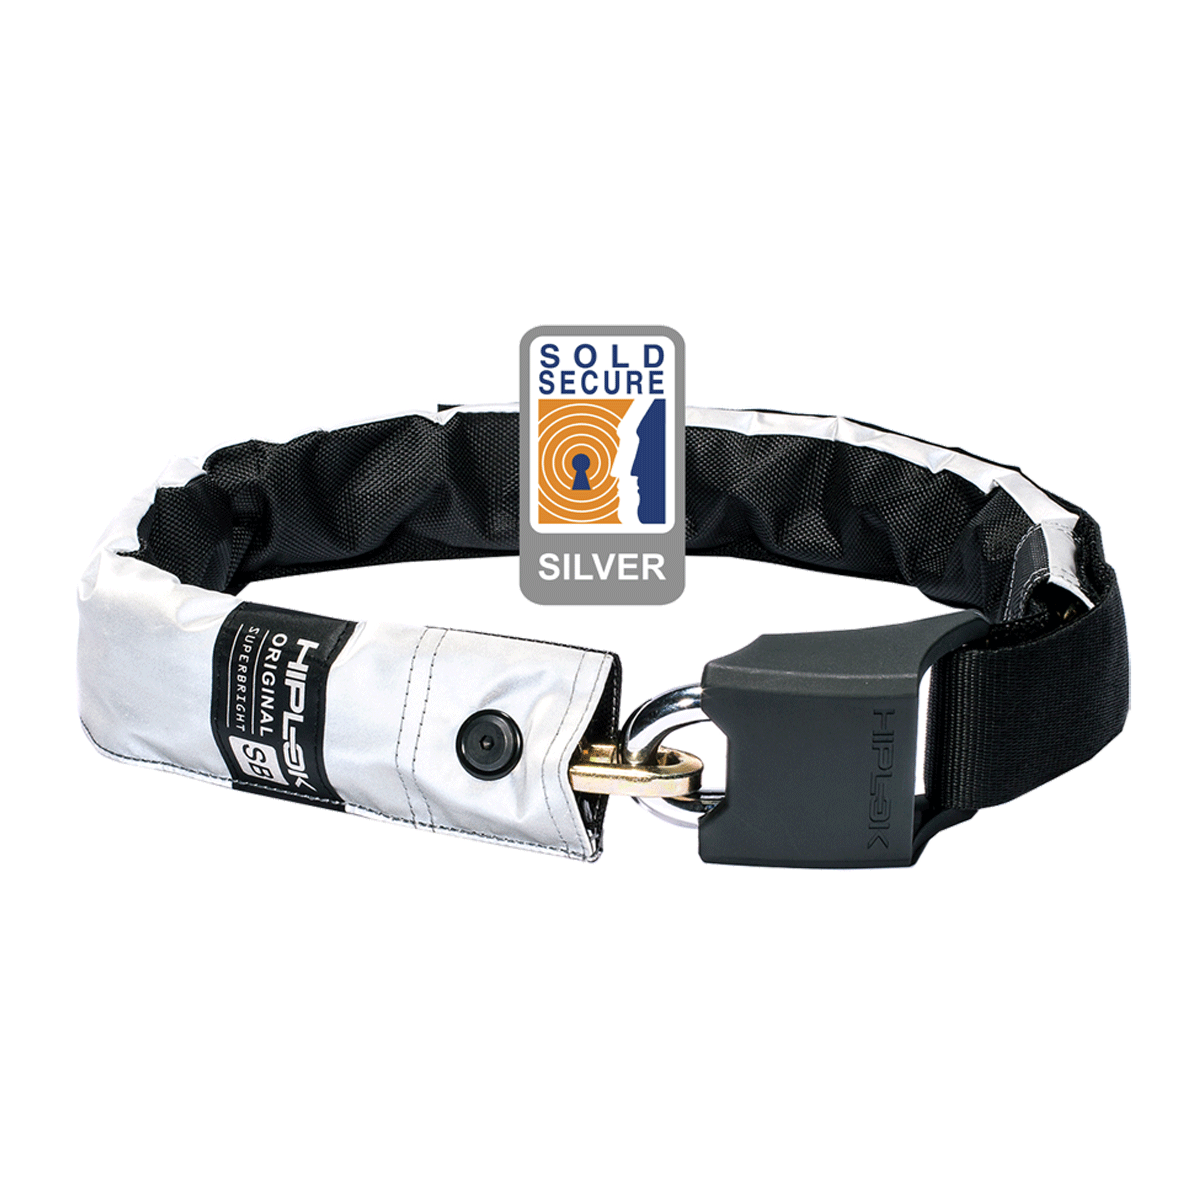 HIPLOK ORIGINAL V1.5 WEARABLE CHAIN LOCK 8MM X 90CM - WAIST 24-44 INCHES (SILVER SOLD SECURE) HIGH VISIBILITY